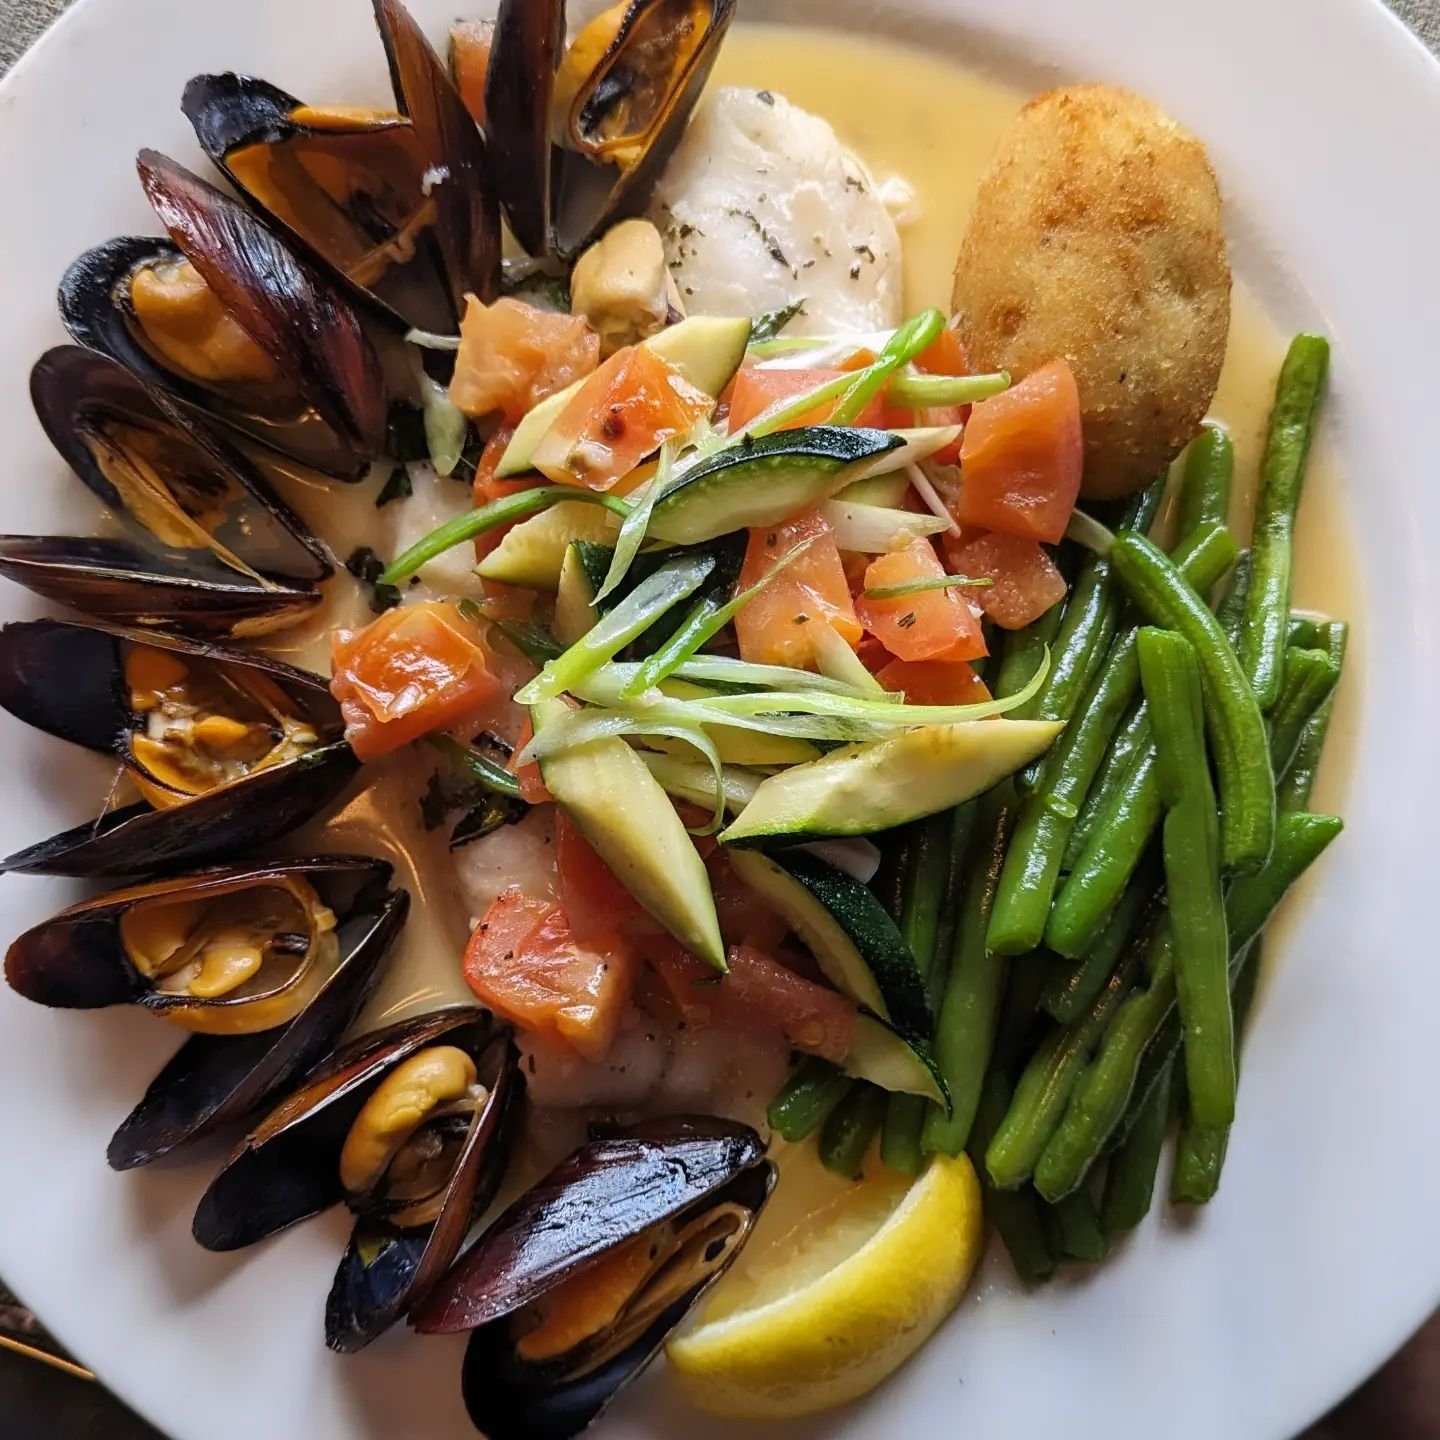 A Shore Thing: Our Fresh Catch of the Day. 🐟 Sea Bass with mussels, tomatoes, scallions, zucchini, lemon &amp; white wine. 

☎️ (914) 835-6199 for take-out &amp; reservations.
📍Harrison, NY

#trattoriavivolo #cucinaitaliana #vivolo #harrison #seafo